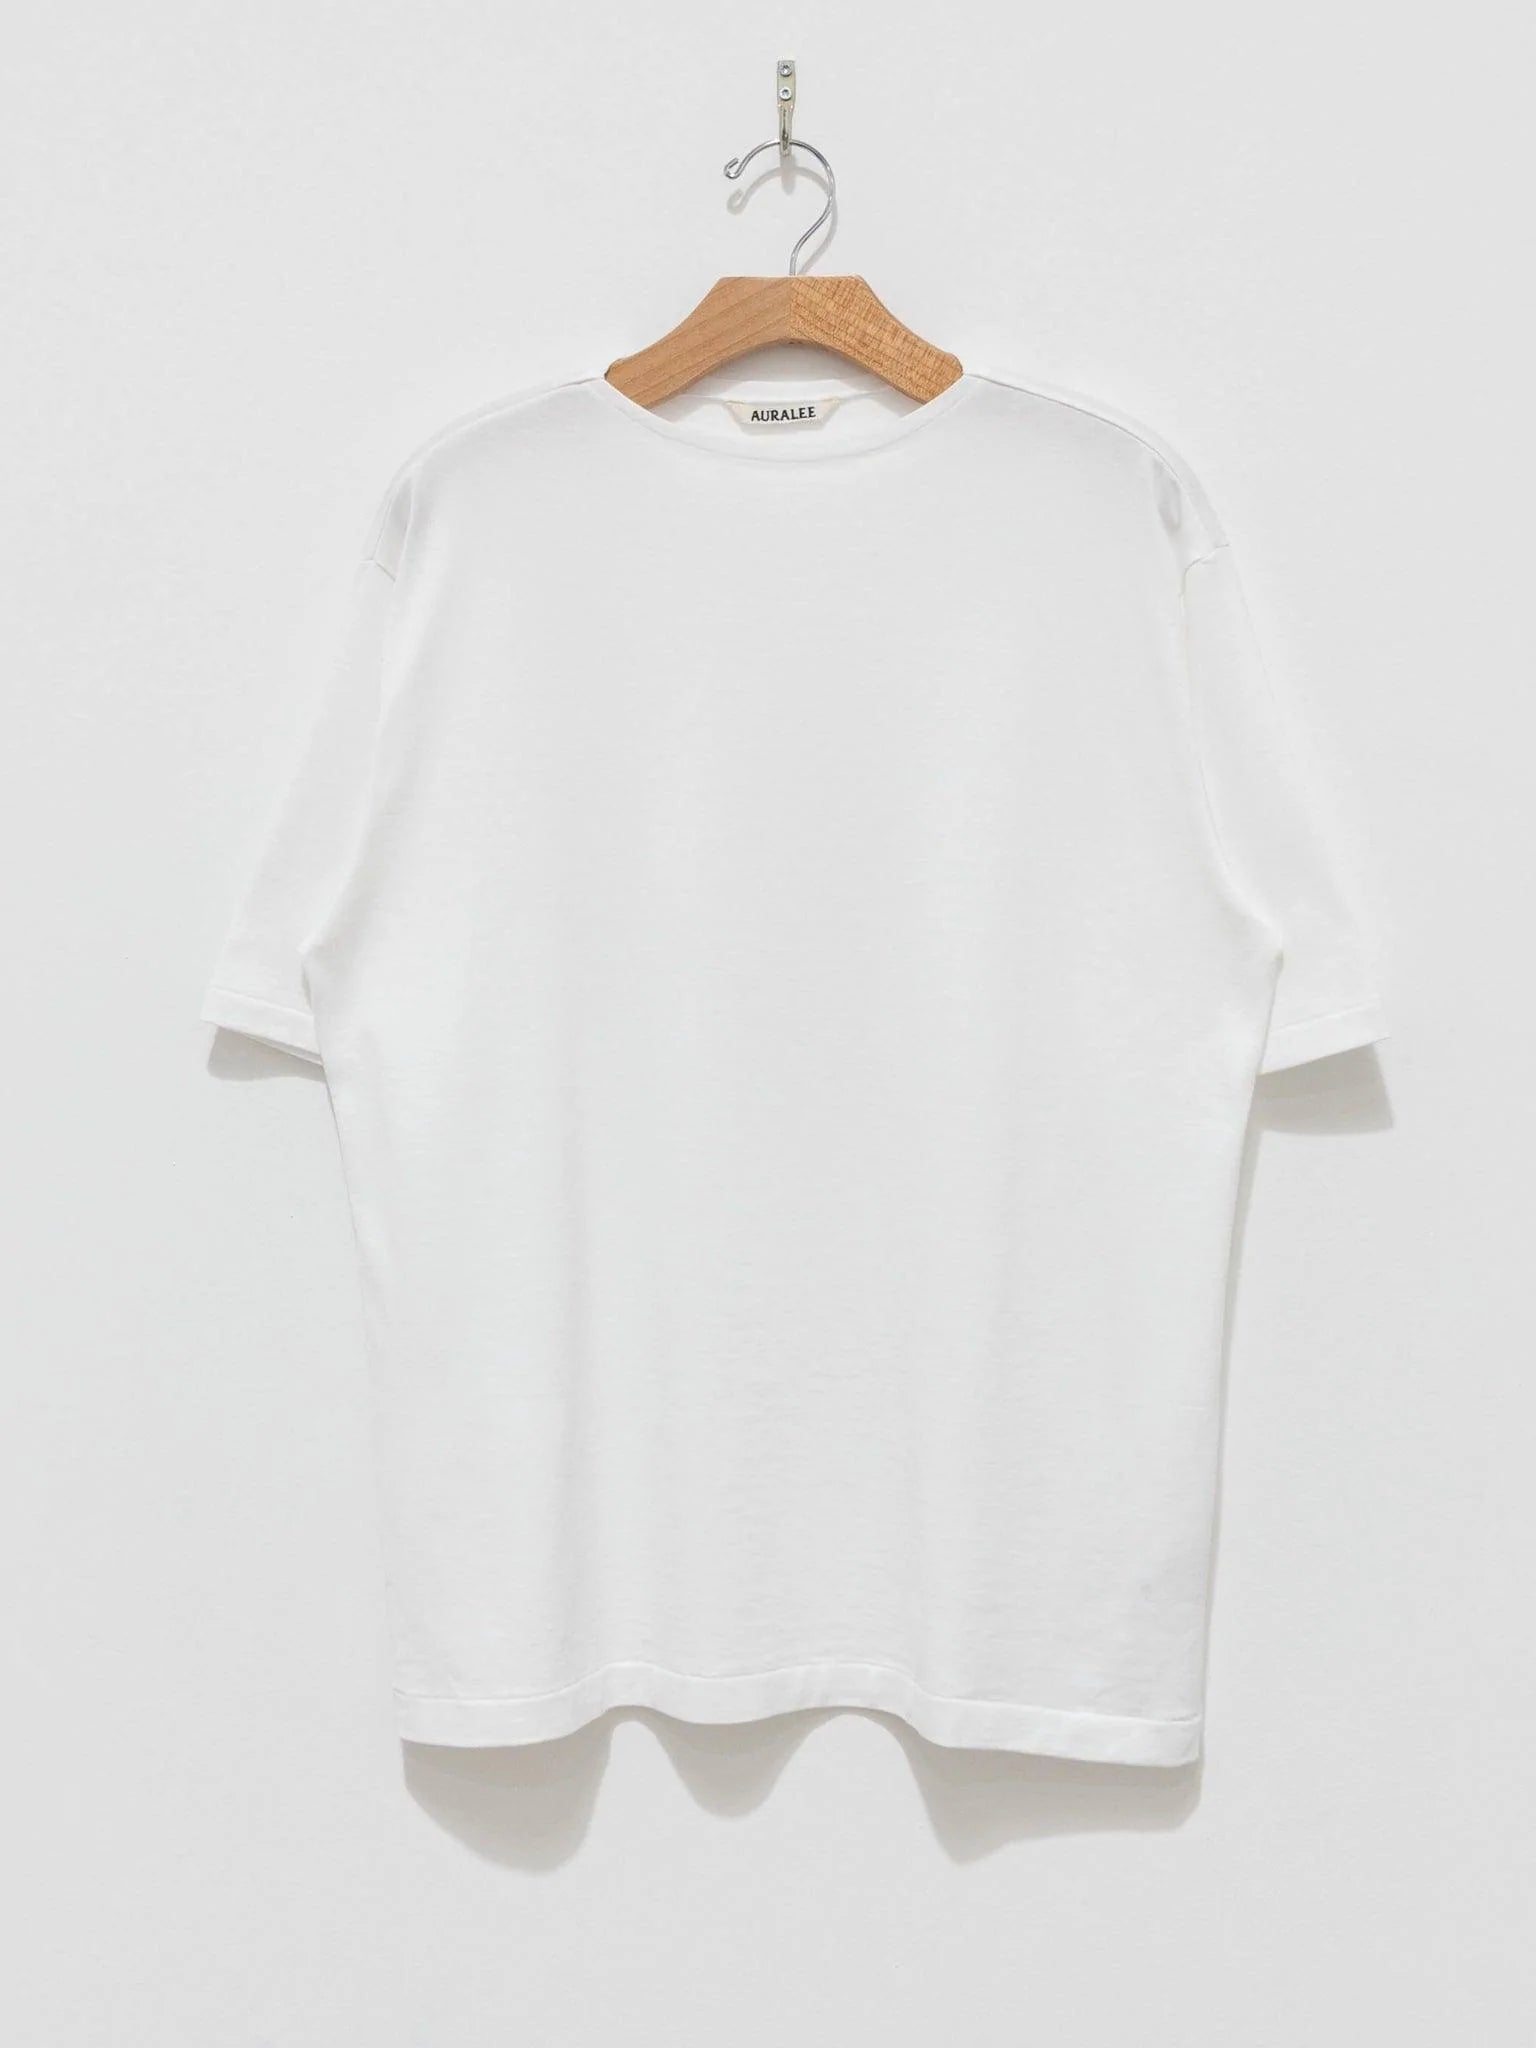 Luster Plaiting Boat Neck Tee - White